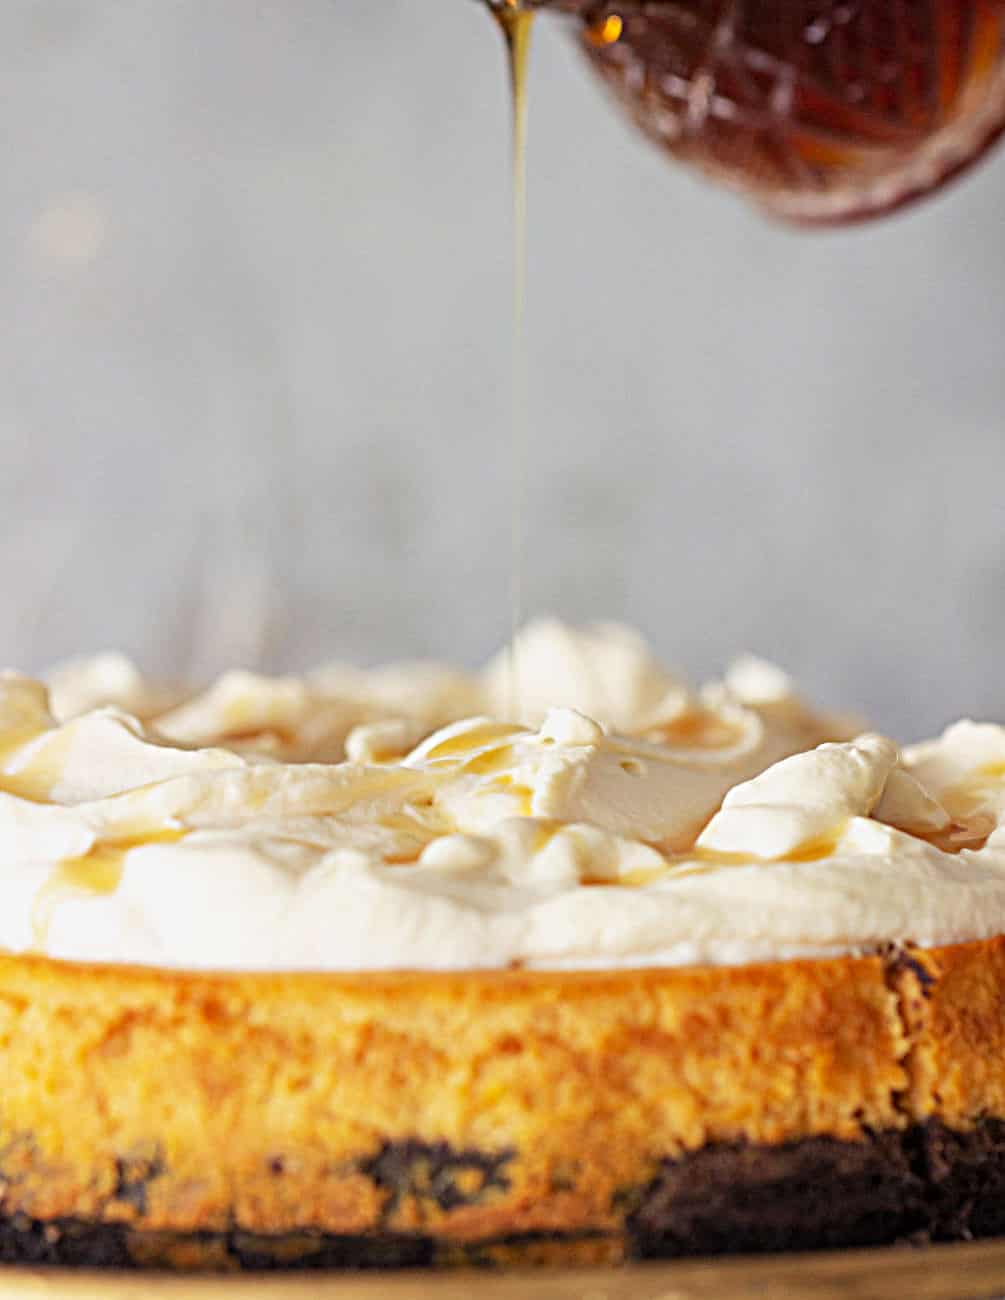 Pouring maple syrup on whipped cream topping on a pumpkin chocolate cheesecake. Grey background. 